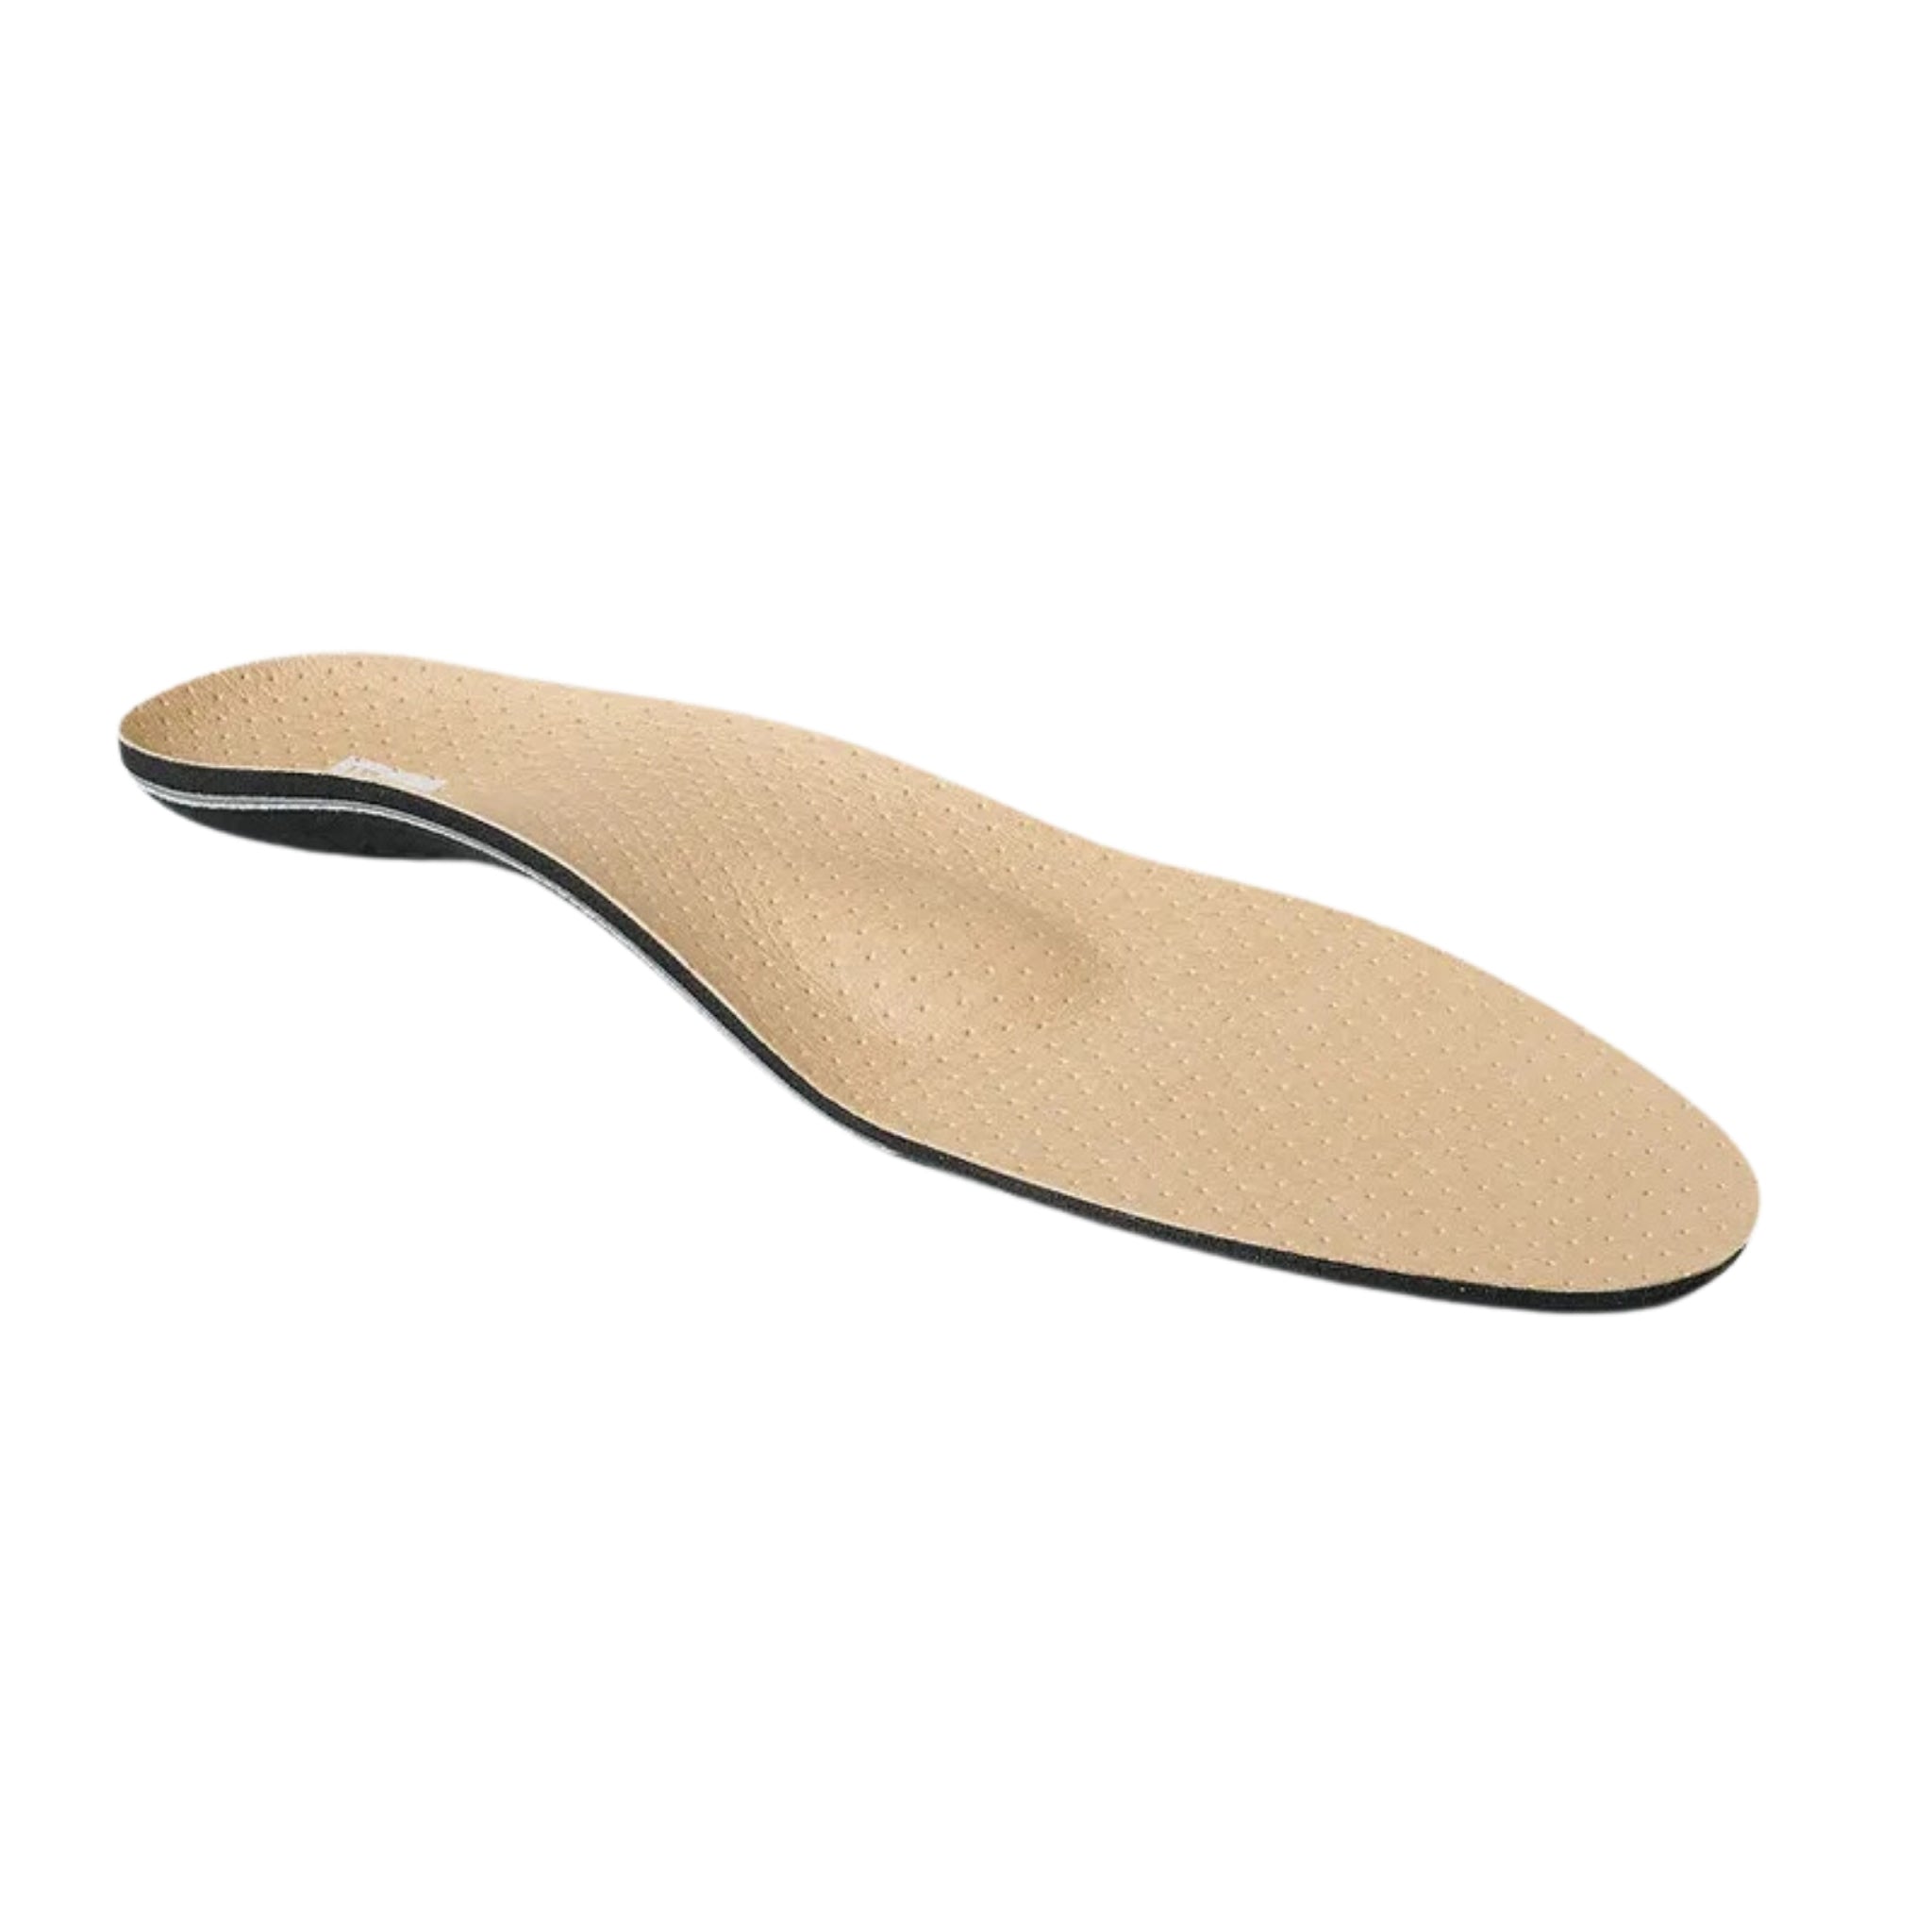 Foot Support Business Pro | Orthotic Insoles for Dress Shoes | Metatarsal Pad